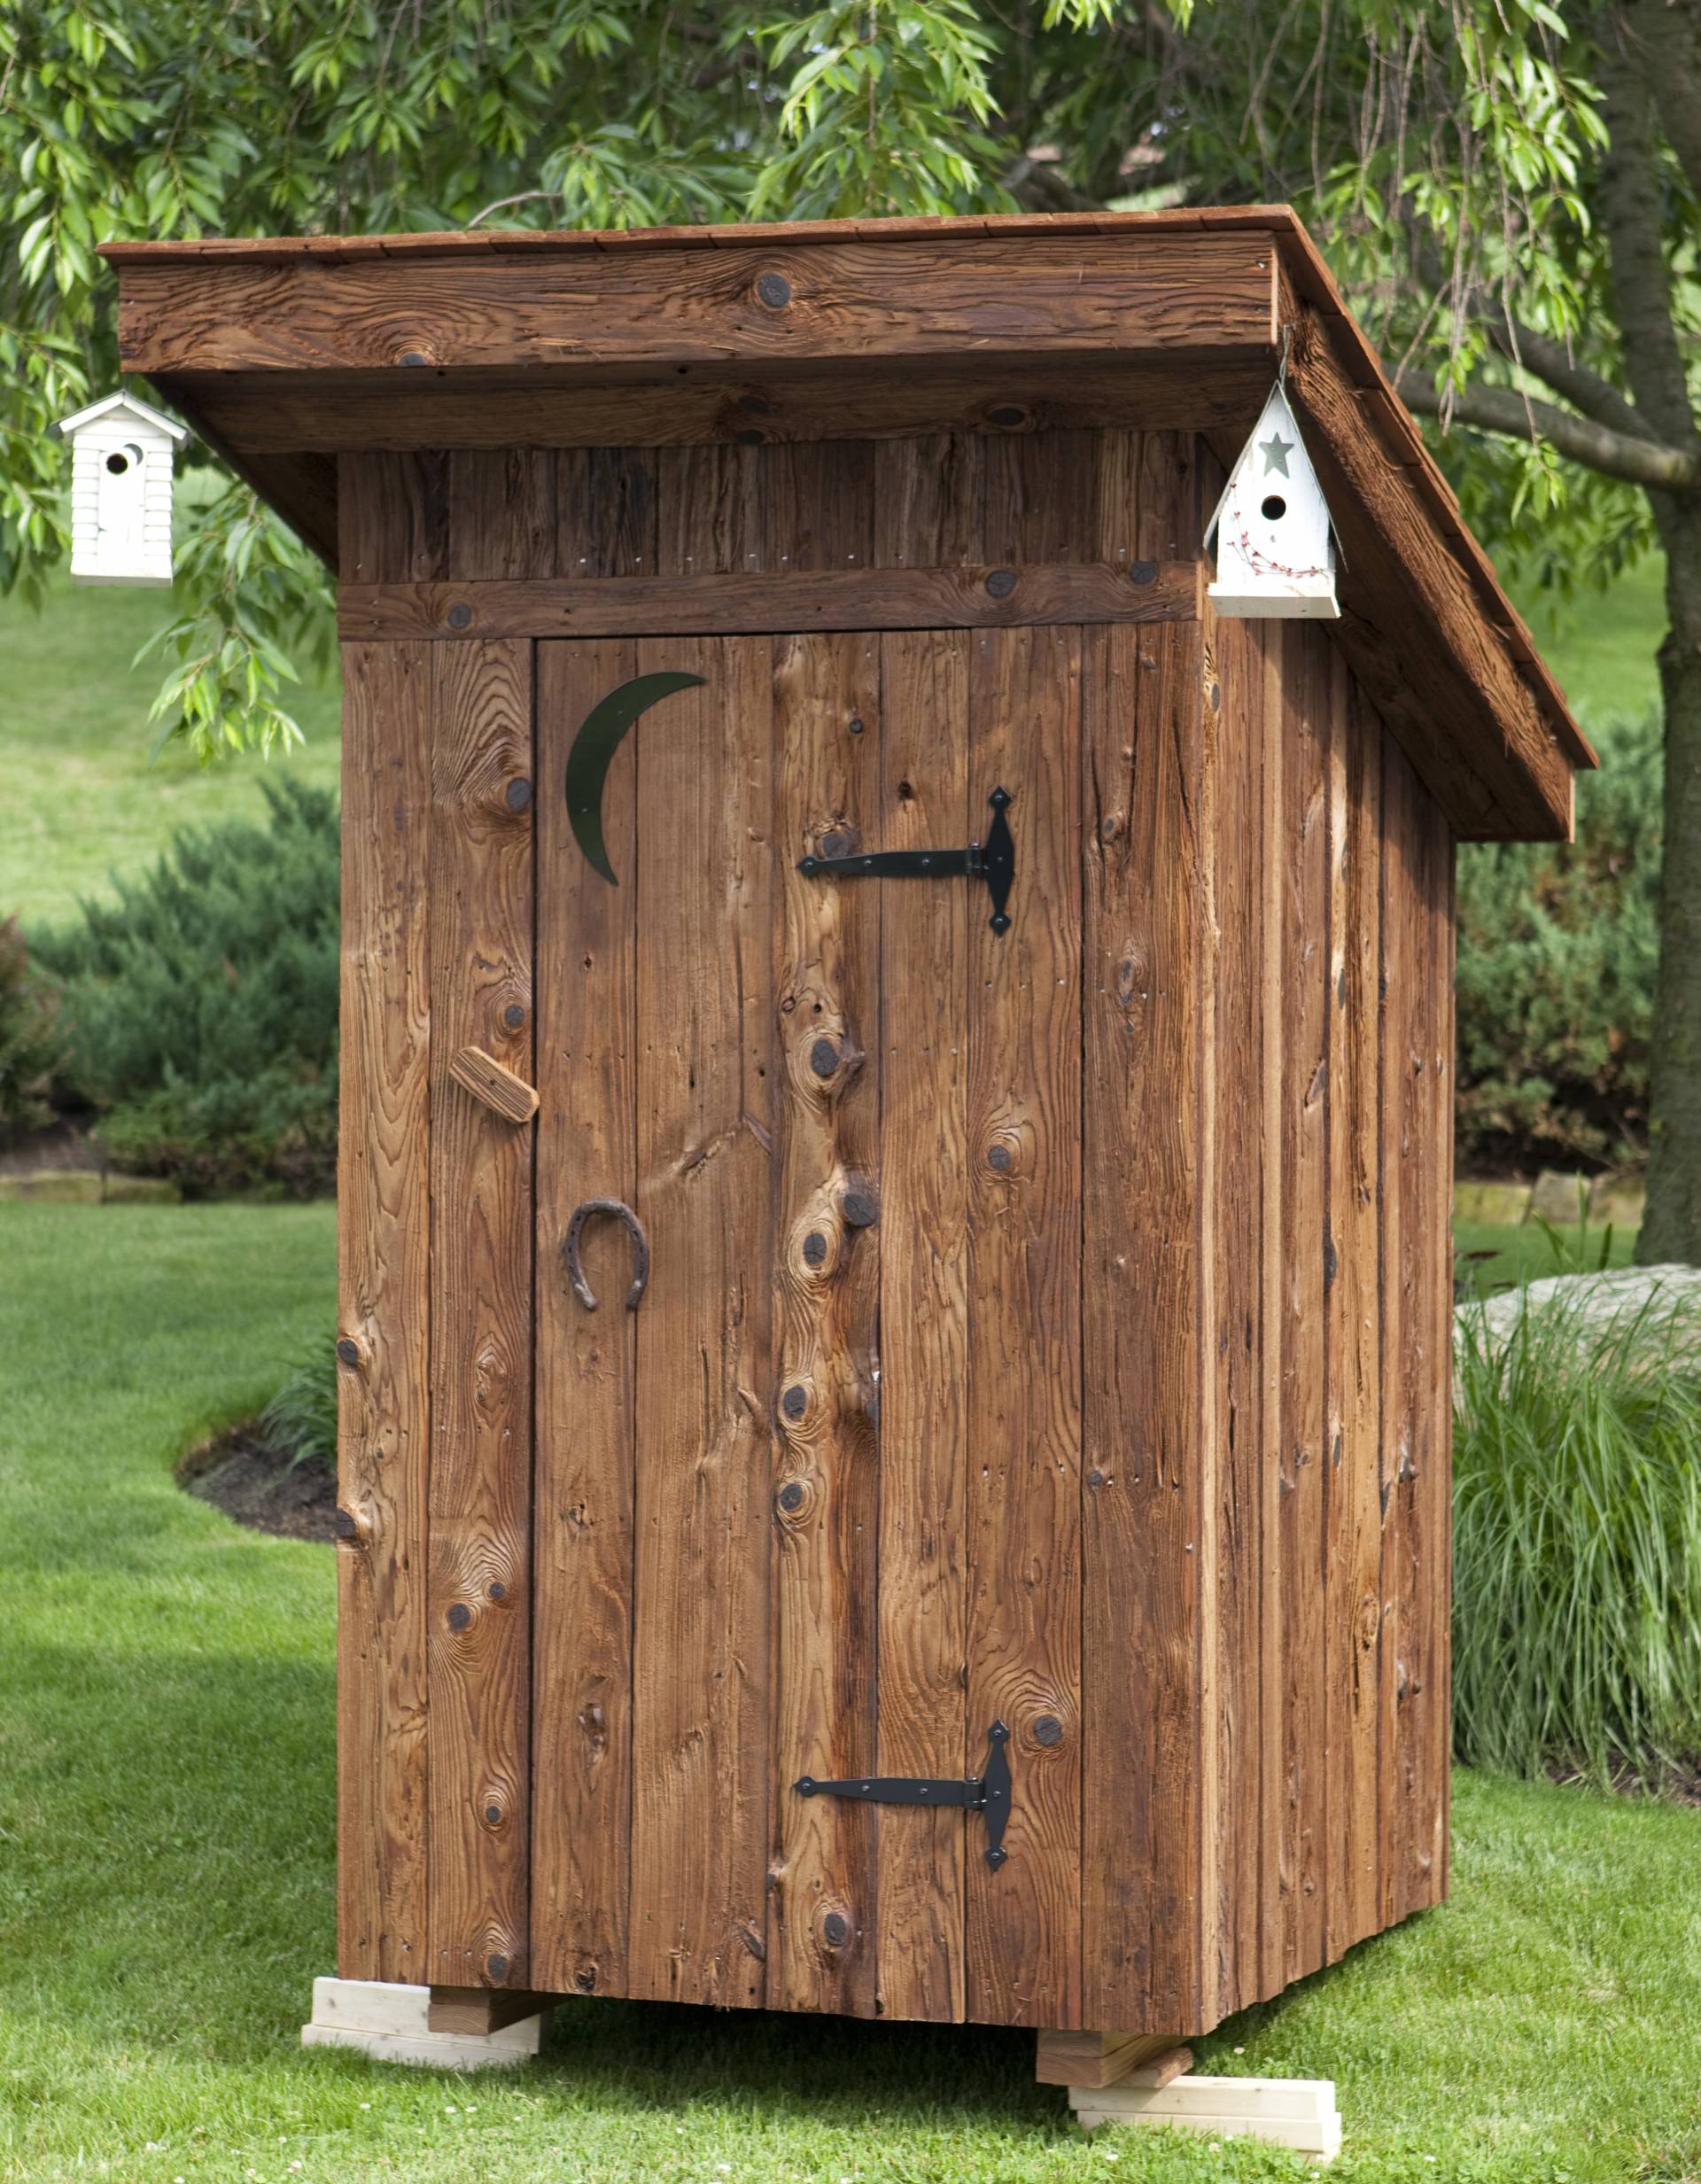 outhouse for sale in md amish built, vintage & wooden